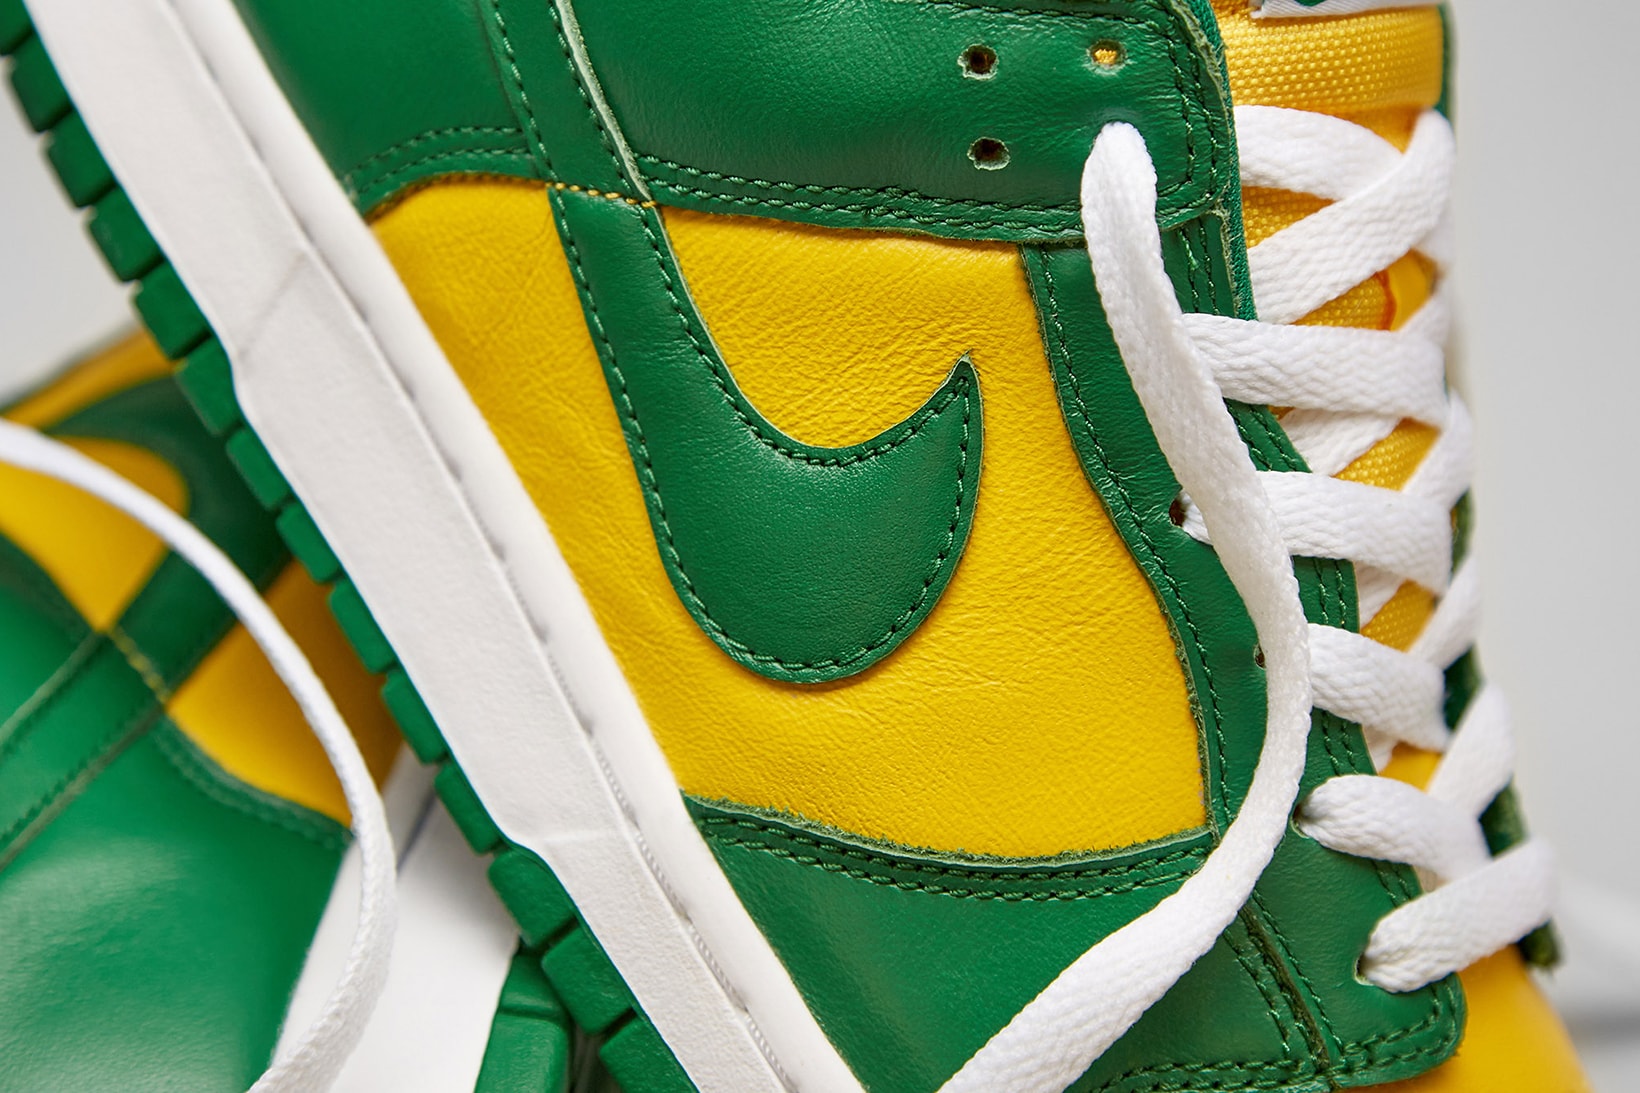 Dunk Low 'Pine Green and Varsity Maize' (CU1727-700) release date